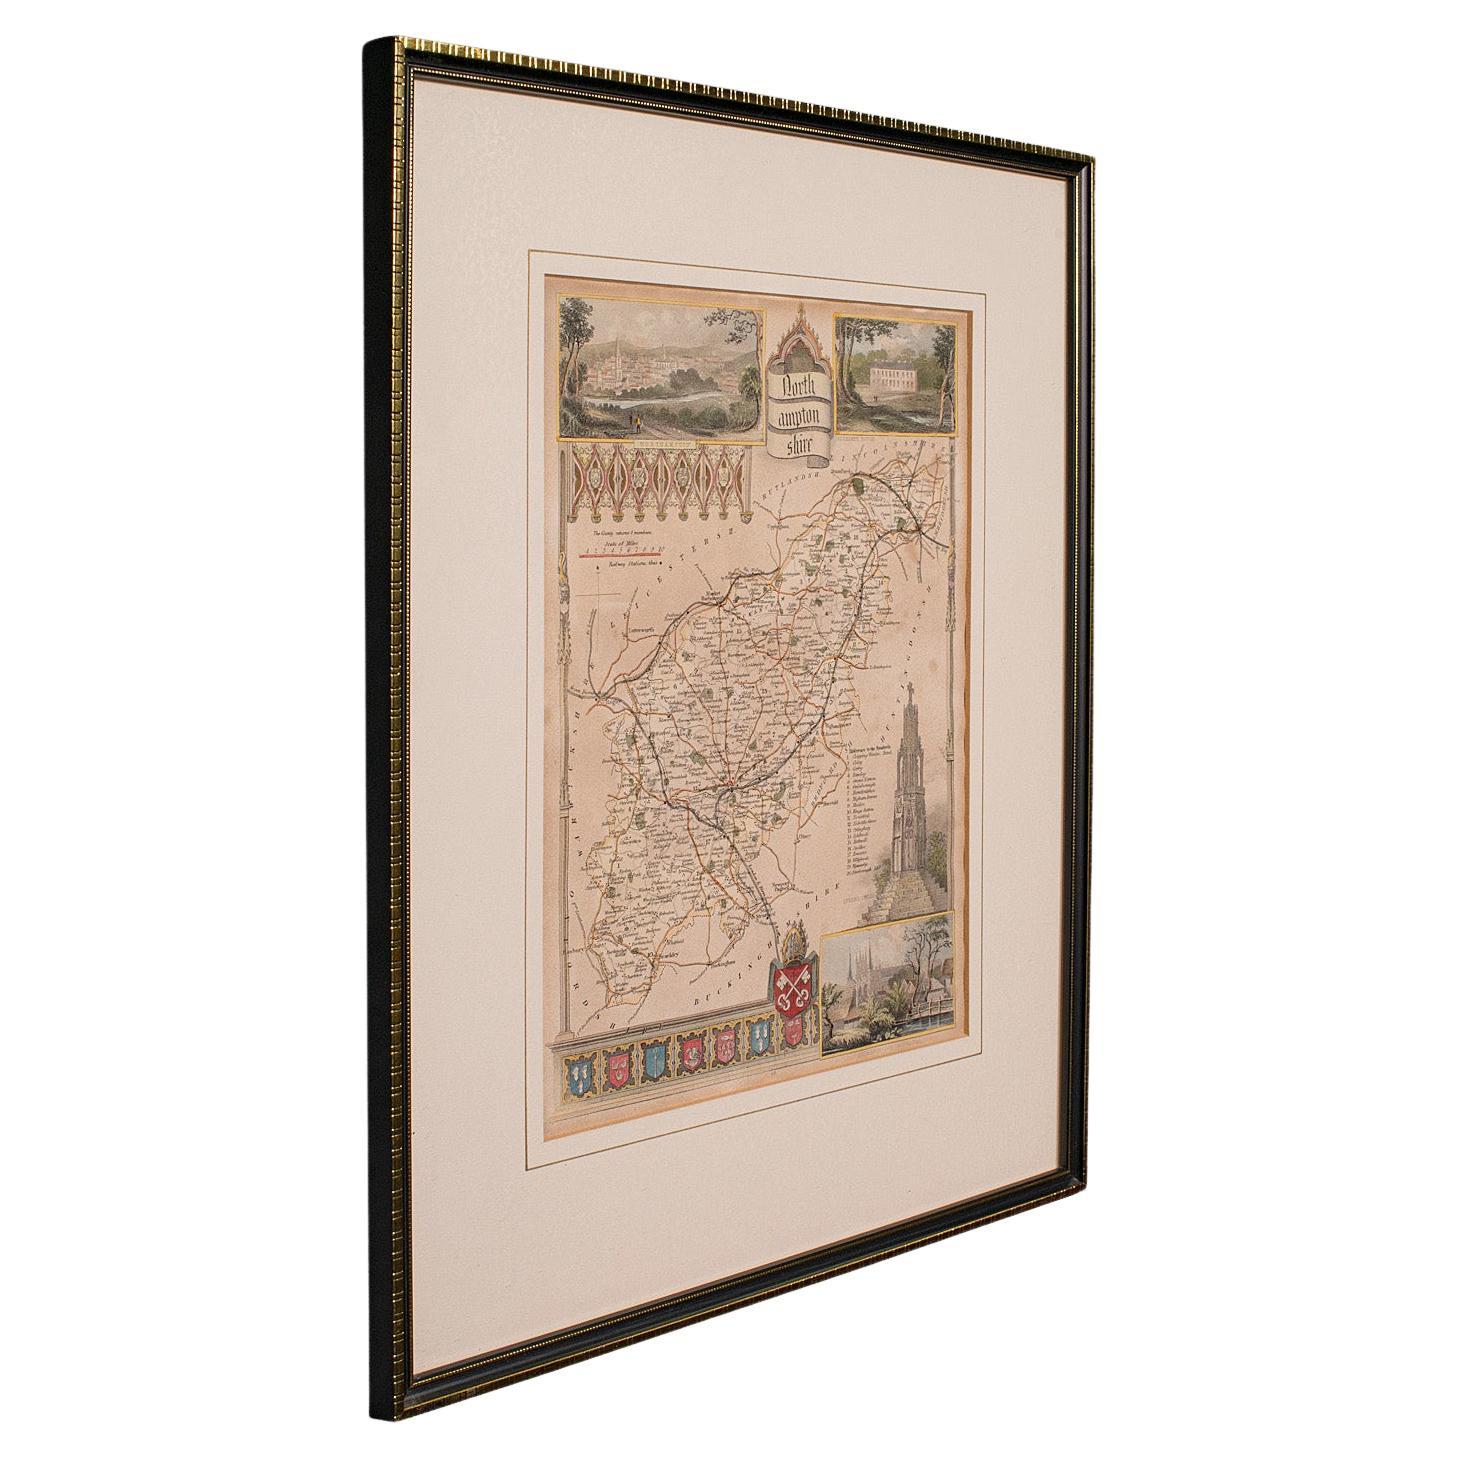 Antique Lithography Map, Northamptonshire, English, Framed Cartography, C.1860 For Sale